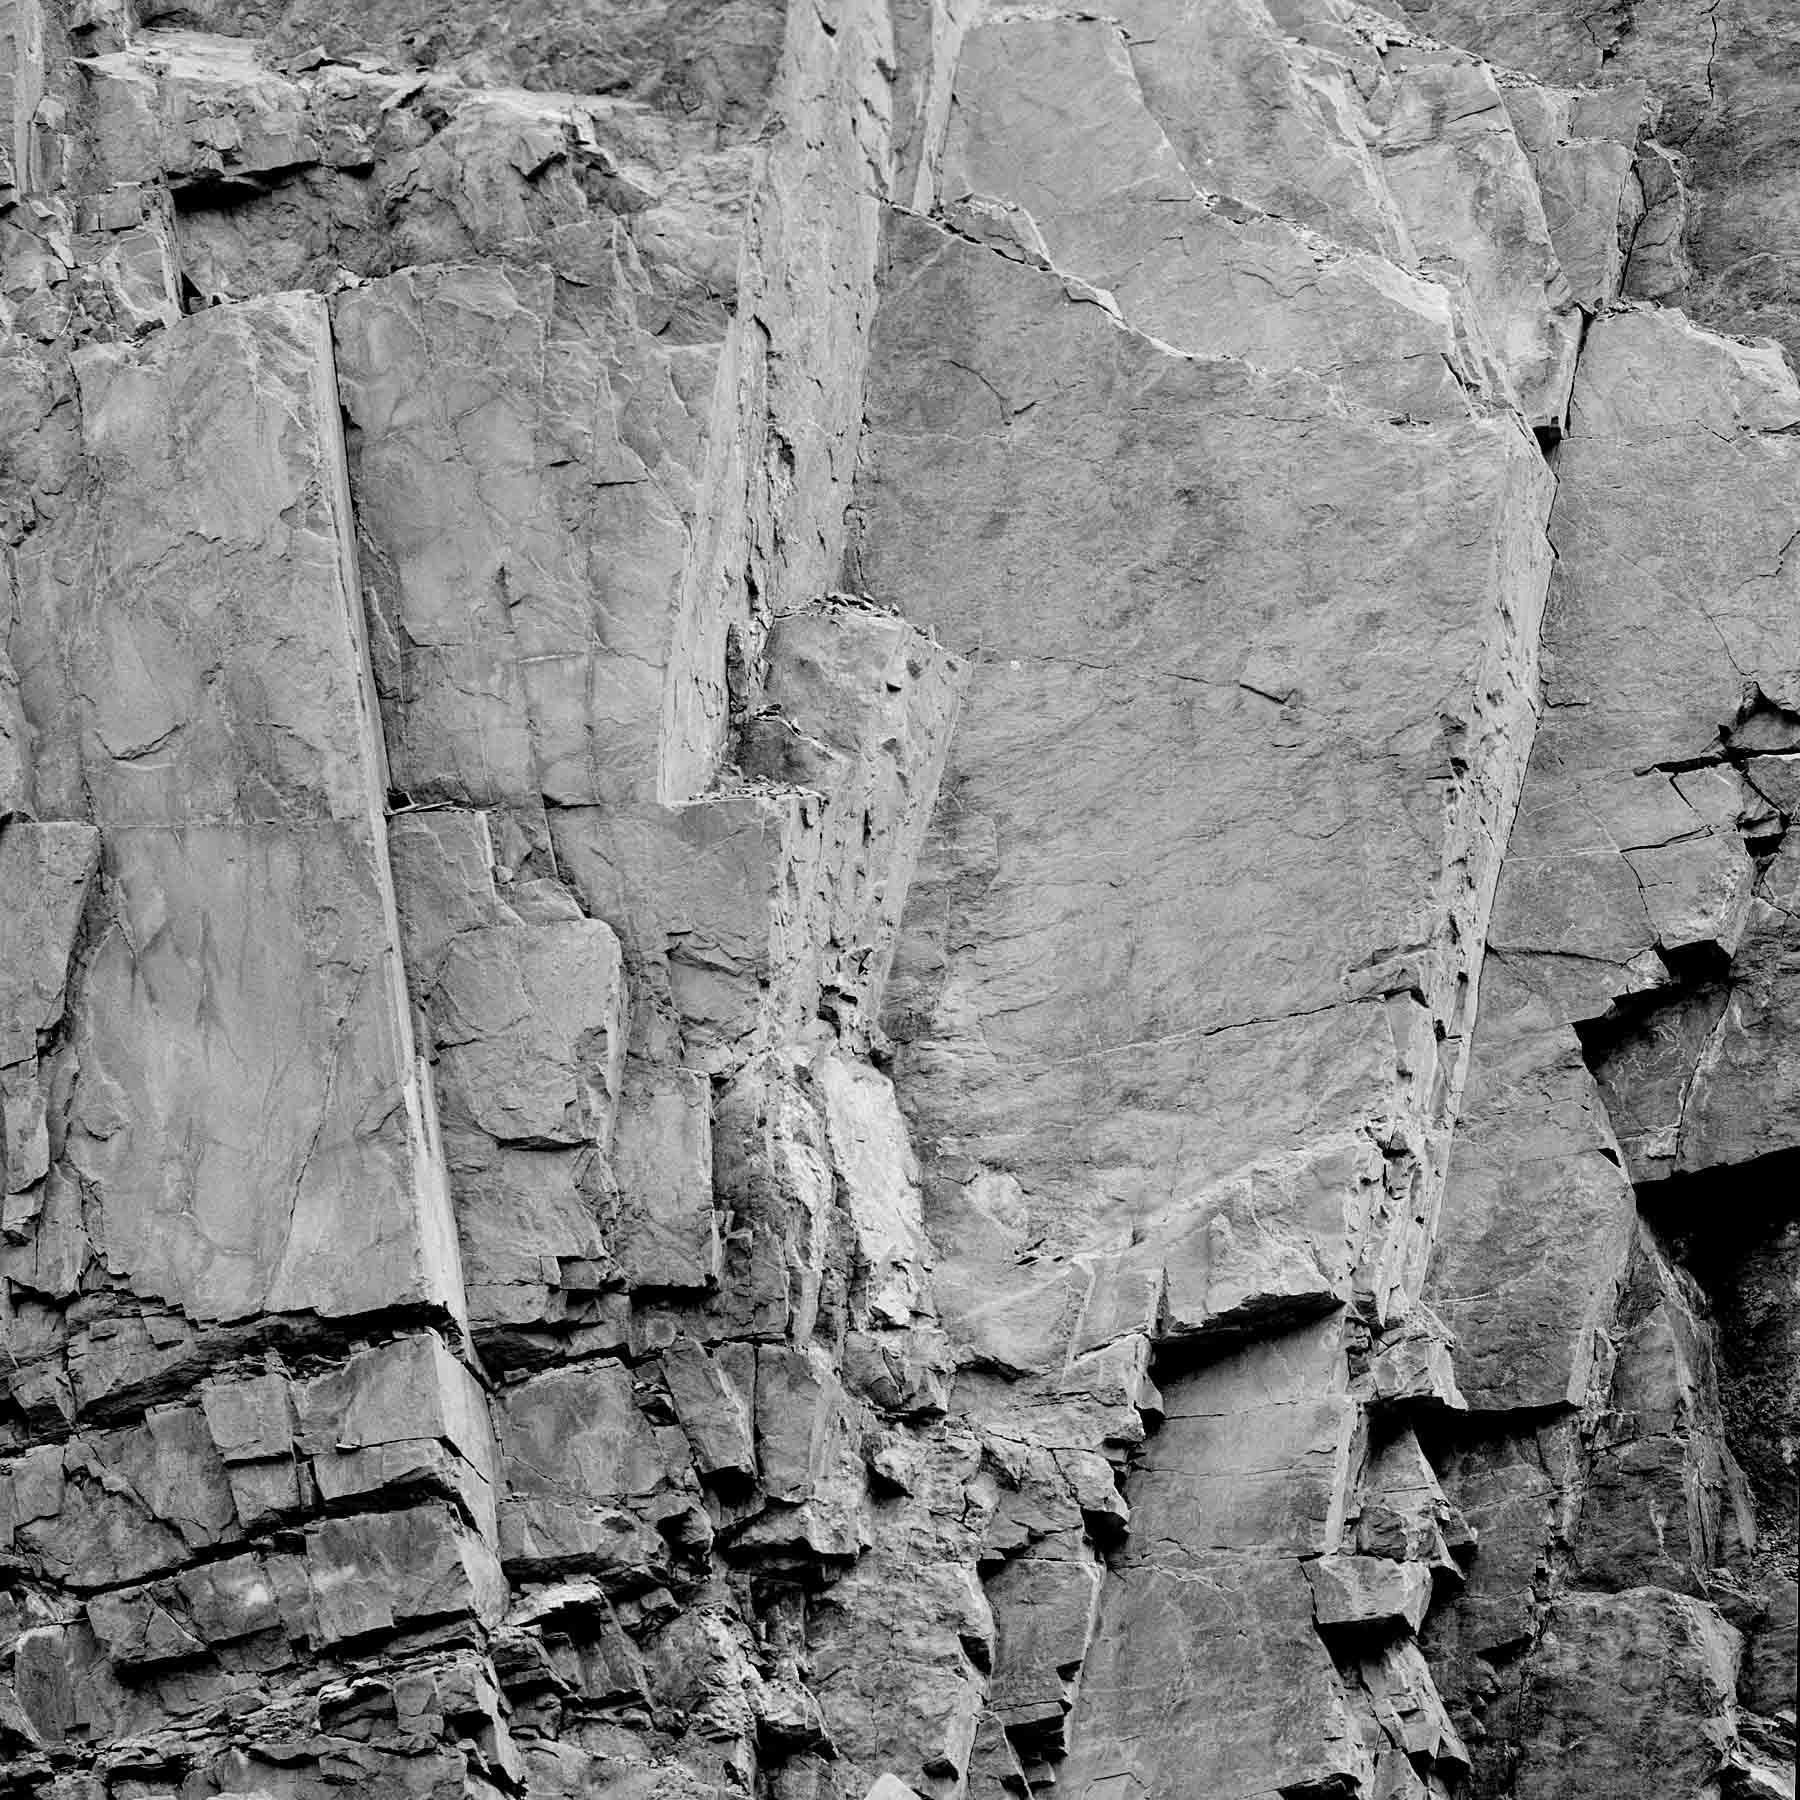 Andrew Buck Black and White Photograph - Rockface 17: New Brutalism Black & White Photograph of Graphic Jagged Rock Cliff